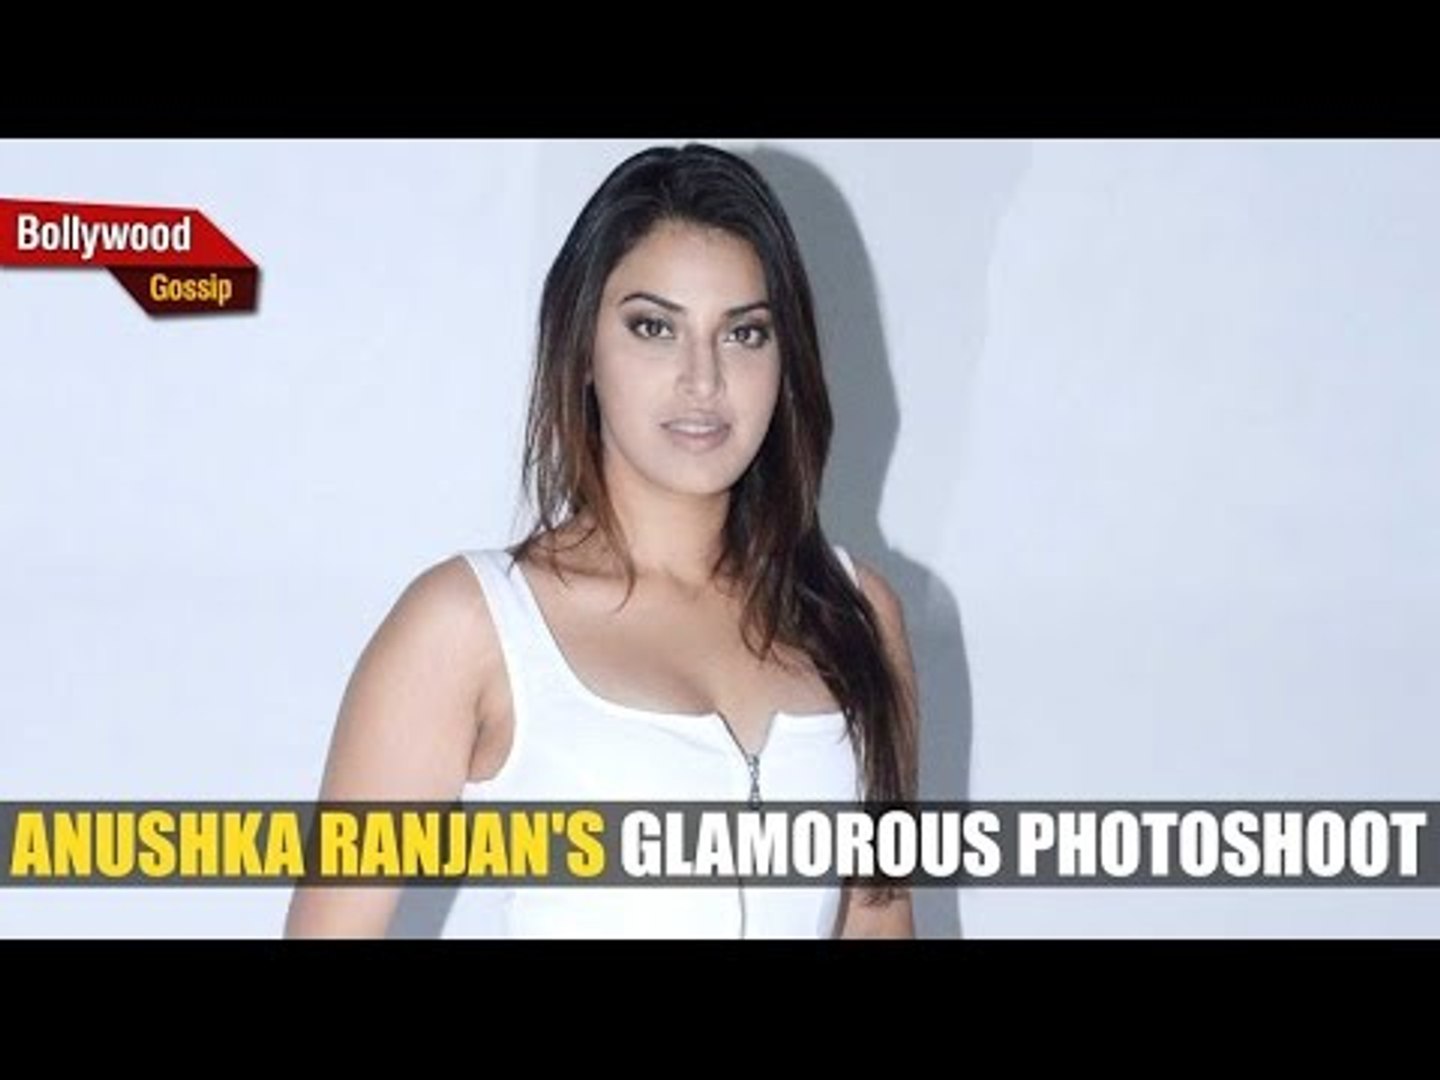 Anushka Ranjan Shows Off Her Oomph Video Dailymotion Anushka s ranjan is an indian film actress and model. dailymotion